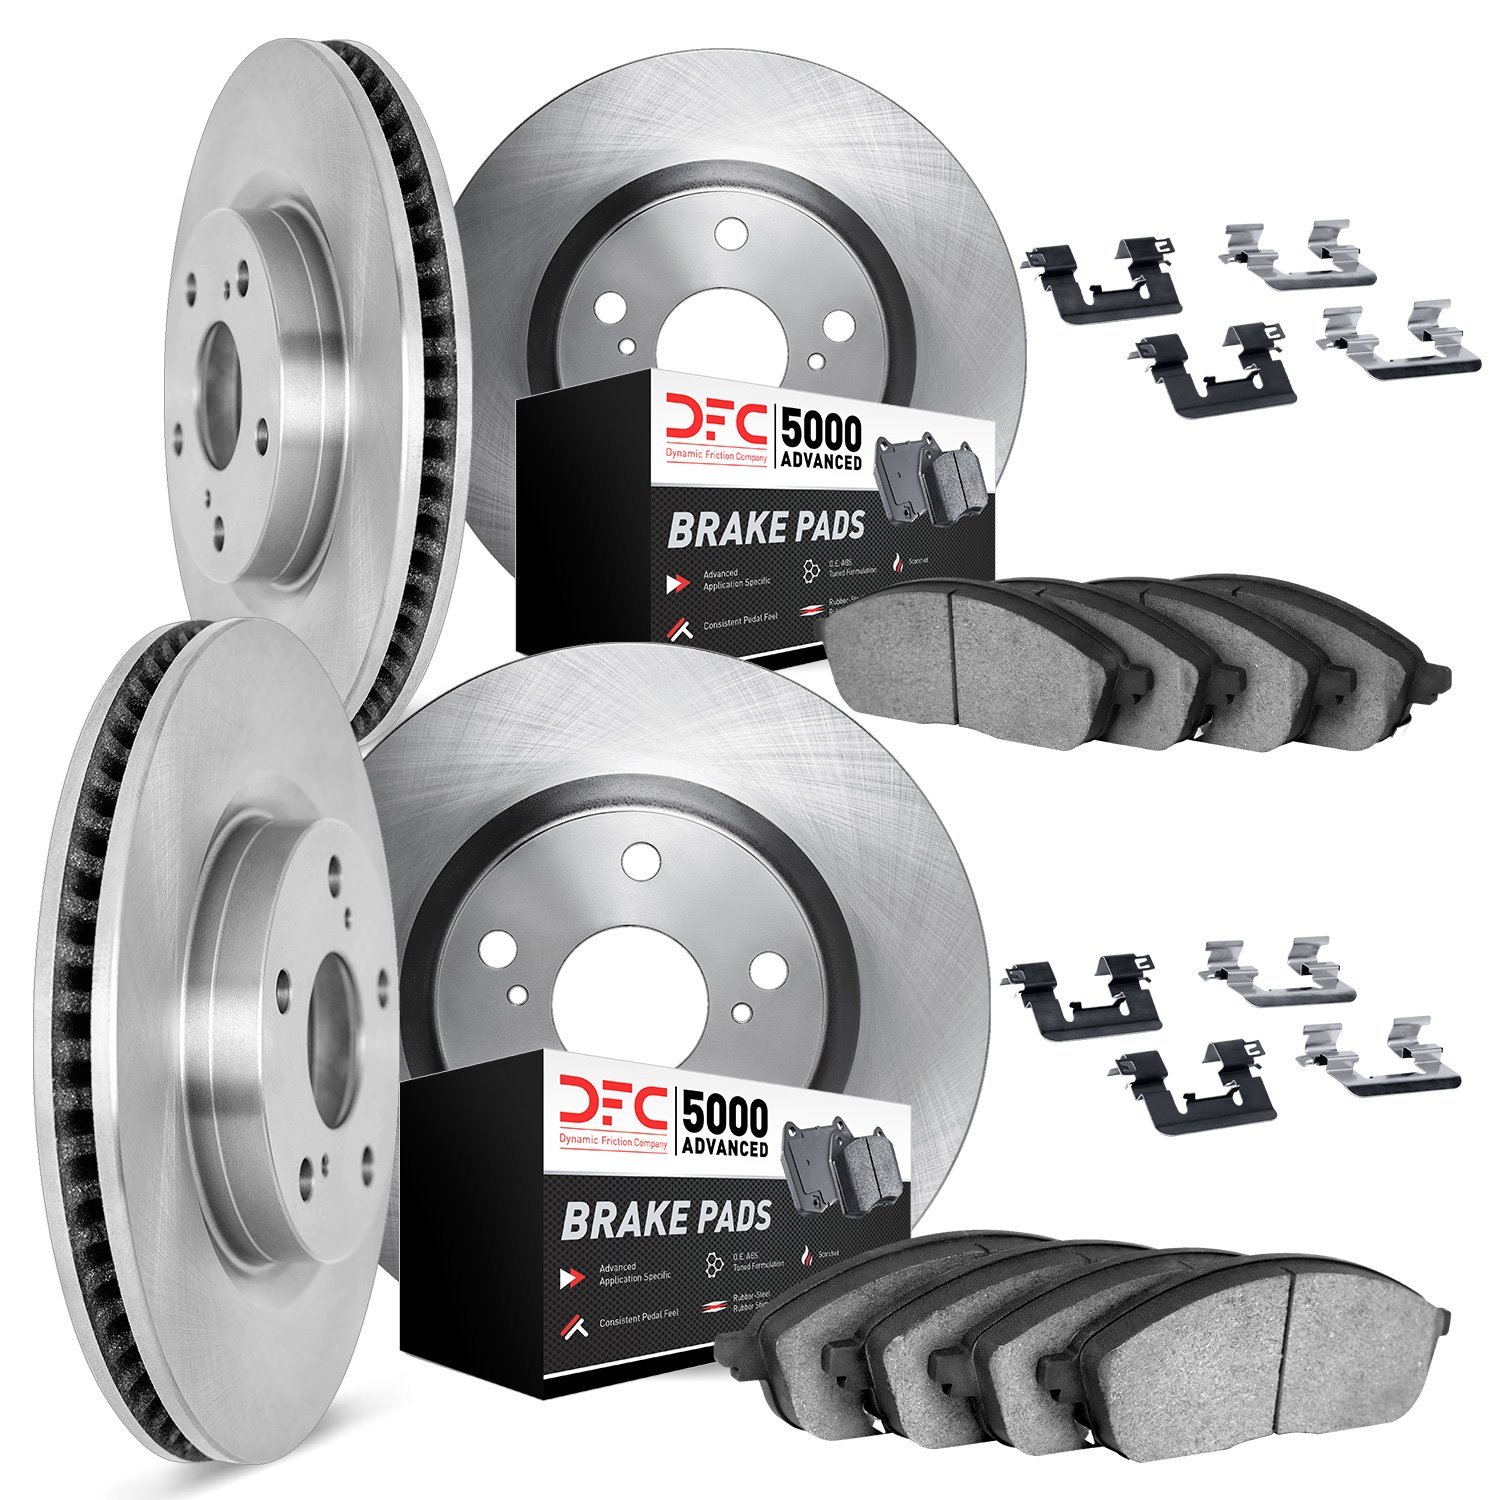 6514-75005 Brake Rotors w/5000 Advanced Brake Pads Kit with Hardware, 1995-2000 Lexus/Toyota/Scion, Position: Front and Rear